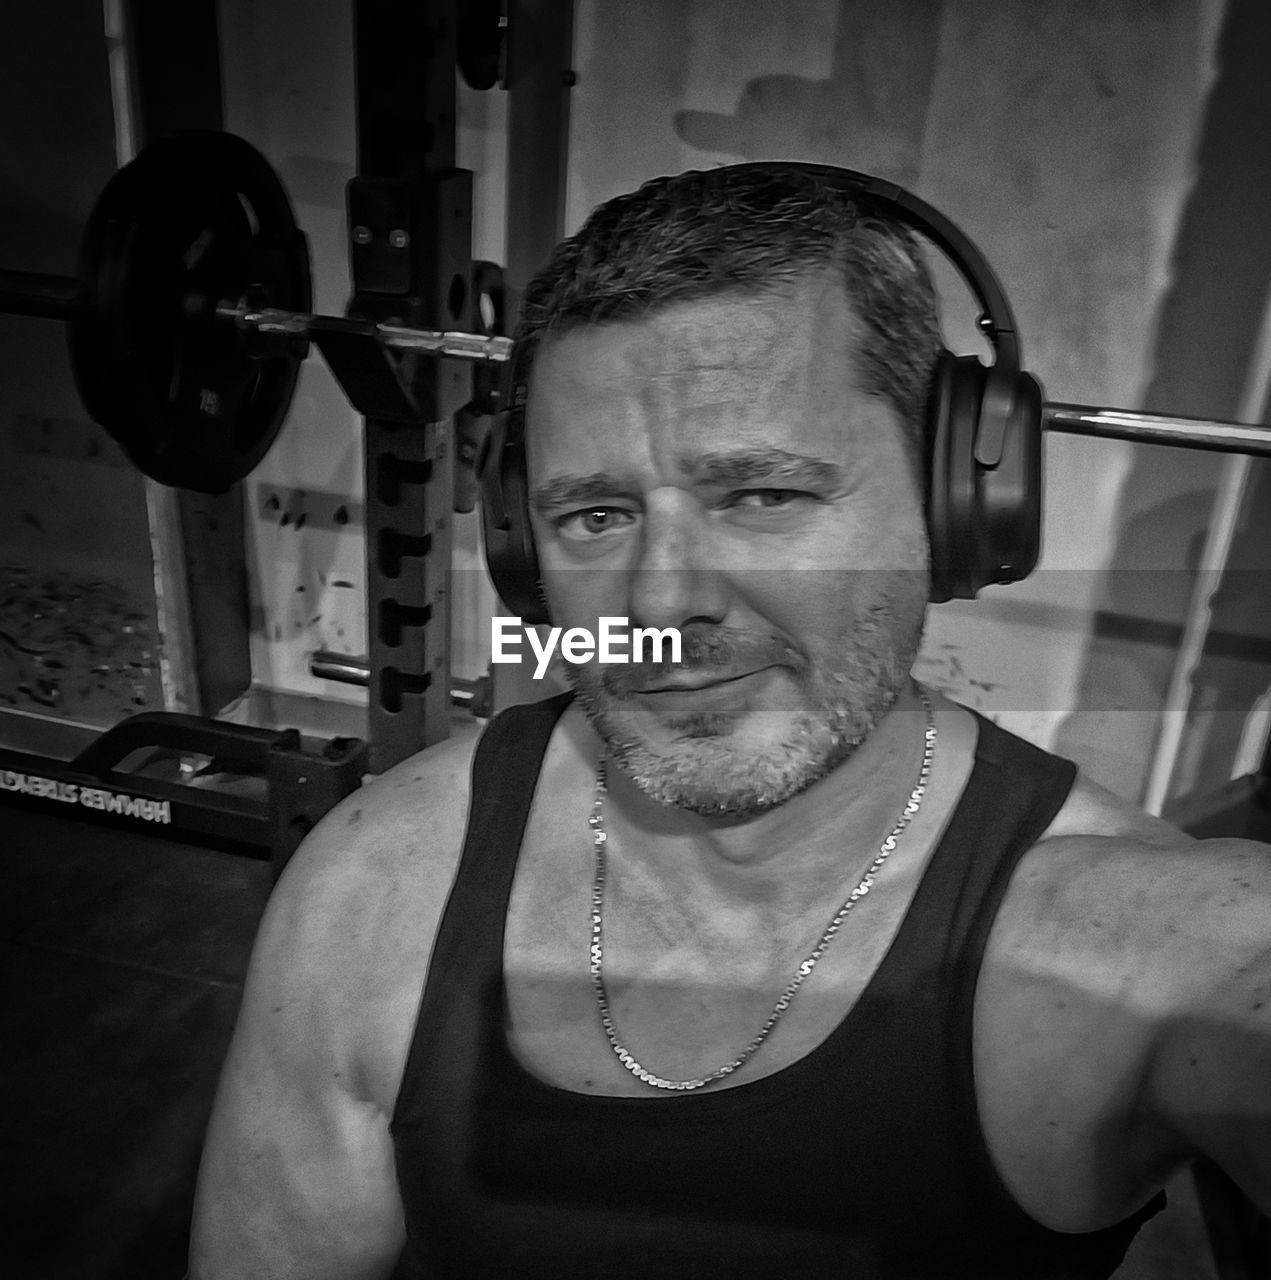 bodybuilding, adult, one person, exercising, sports training, strength, muscular build, gym, lifestyles, sports, weight, men, weight training, portrait, mature adult, indoors, black and white, front view, arm, health club, vitality, barbell, athlete, person, equipment, determination, monochrome, waist up, leisure activity, black, sport venue, sports equipment, physical fitness, wellbeing, monochrome photography, room, tank top